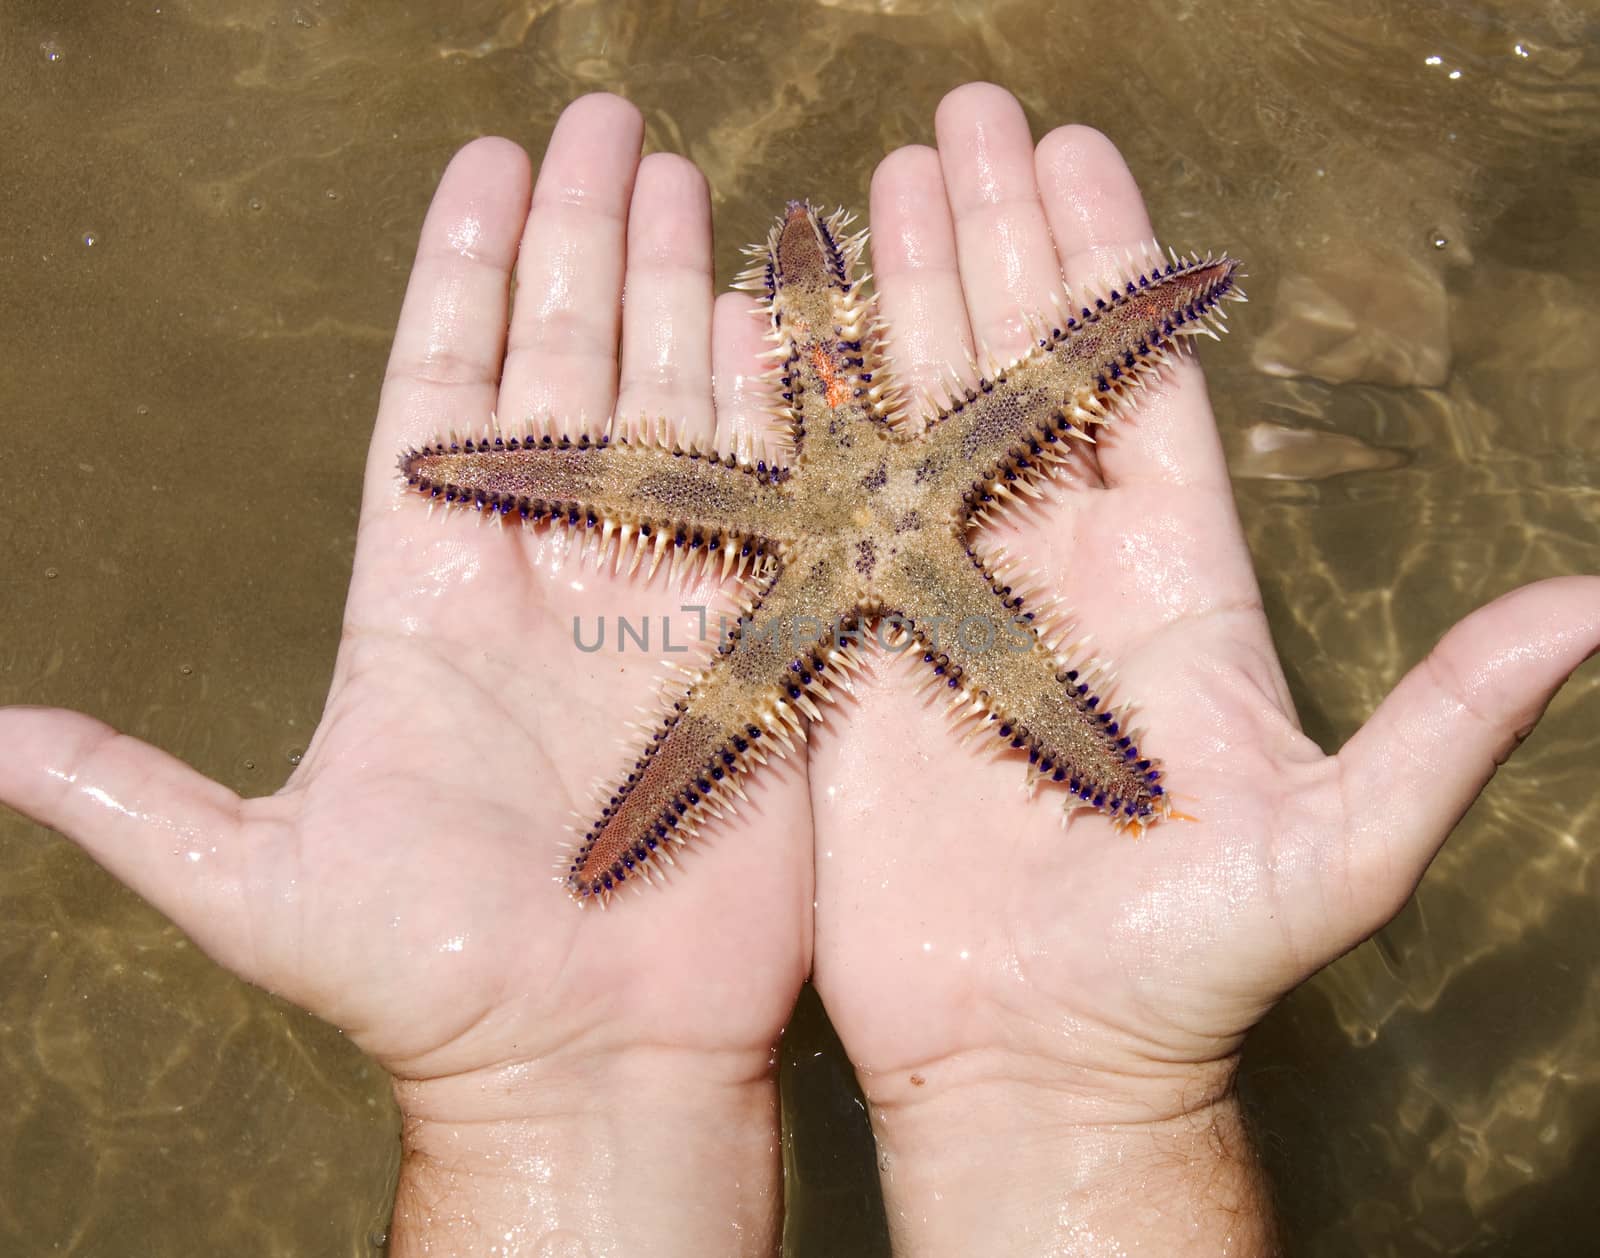 Starfish in the hands by jelen80